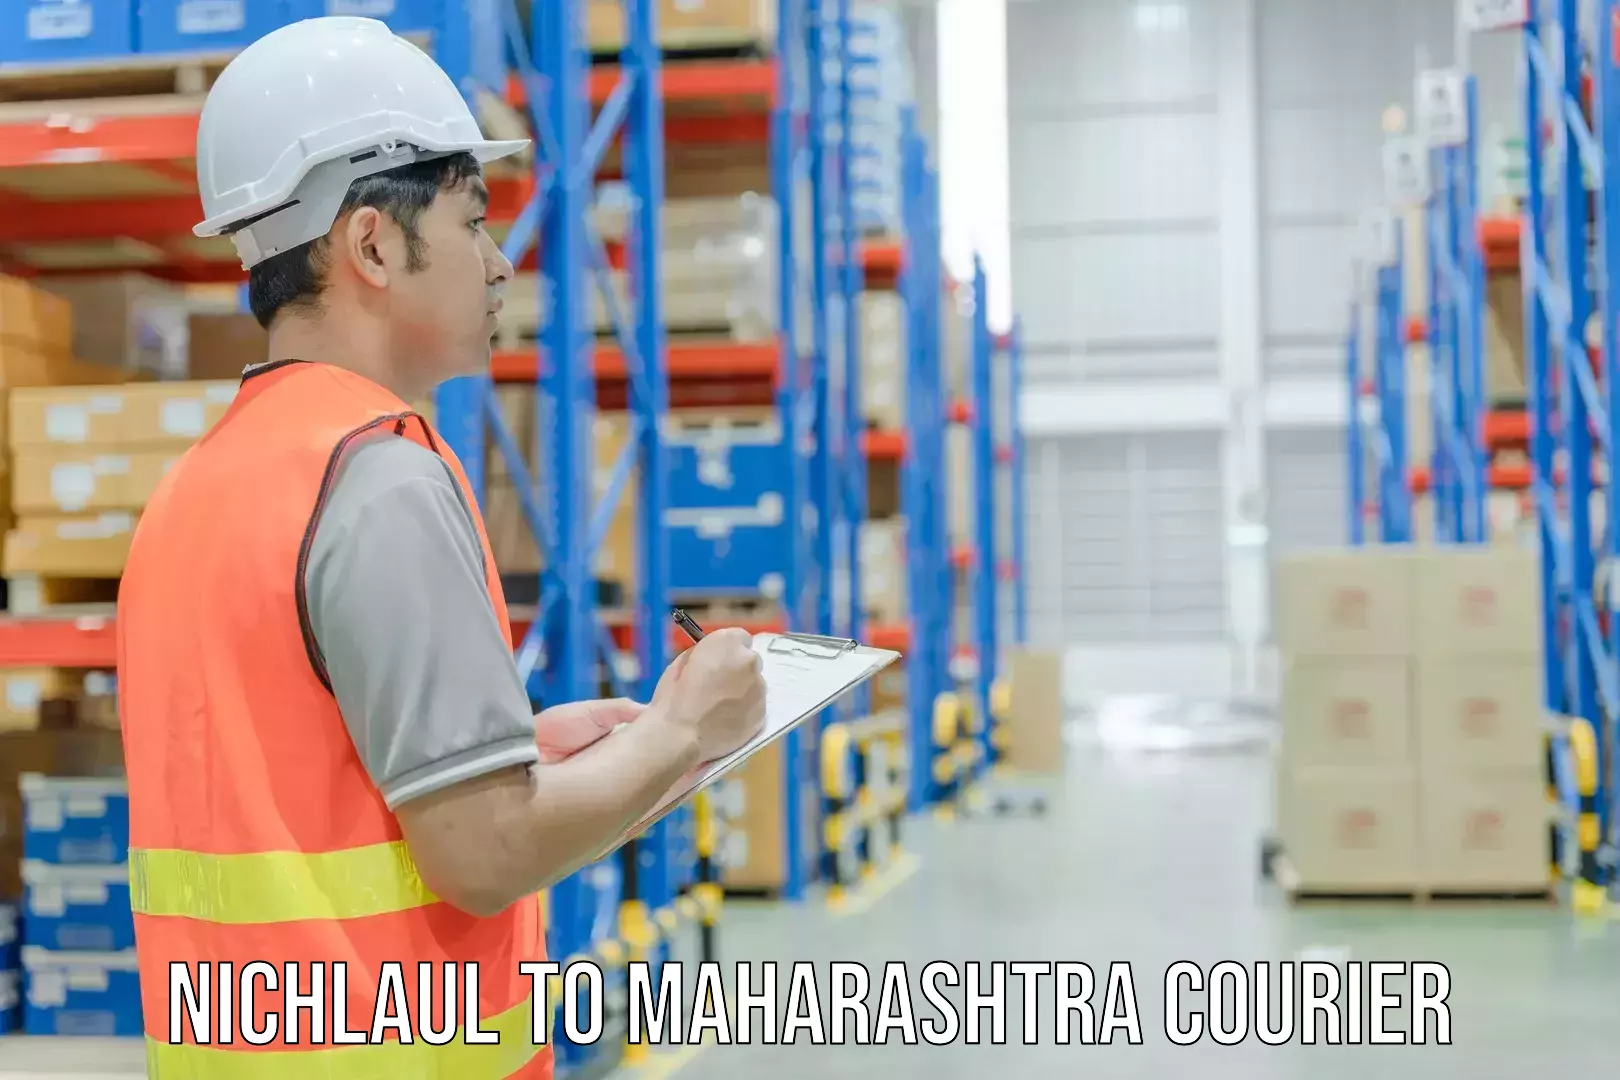 Multi-service courier options Nichlaul to Bhusawal